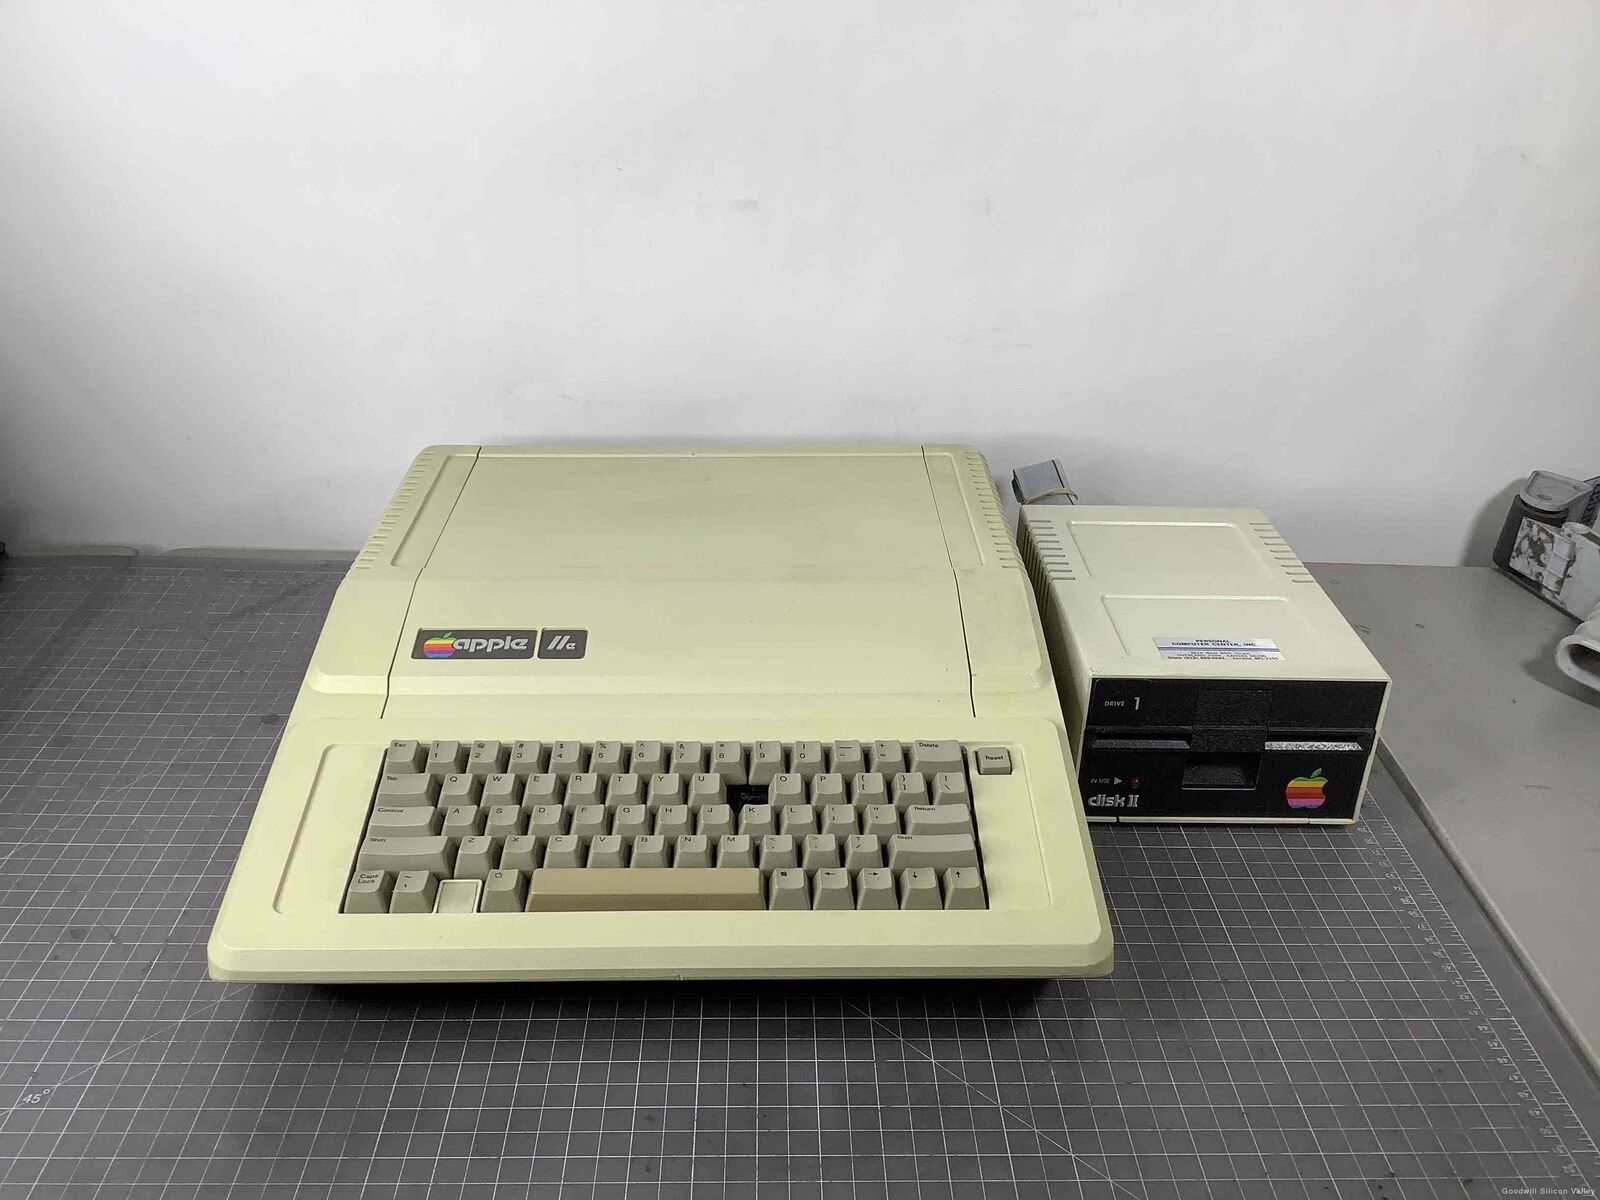 Vintage Apple IIe A2S2064 Personal Computer w/ Floppy Disk Drive UNTESTED